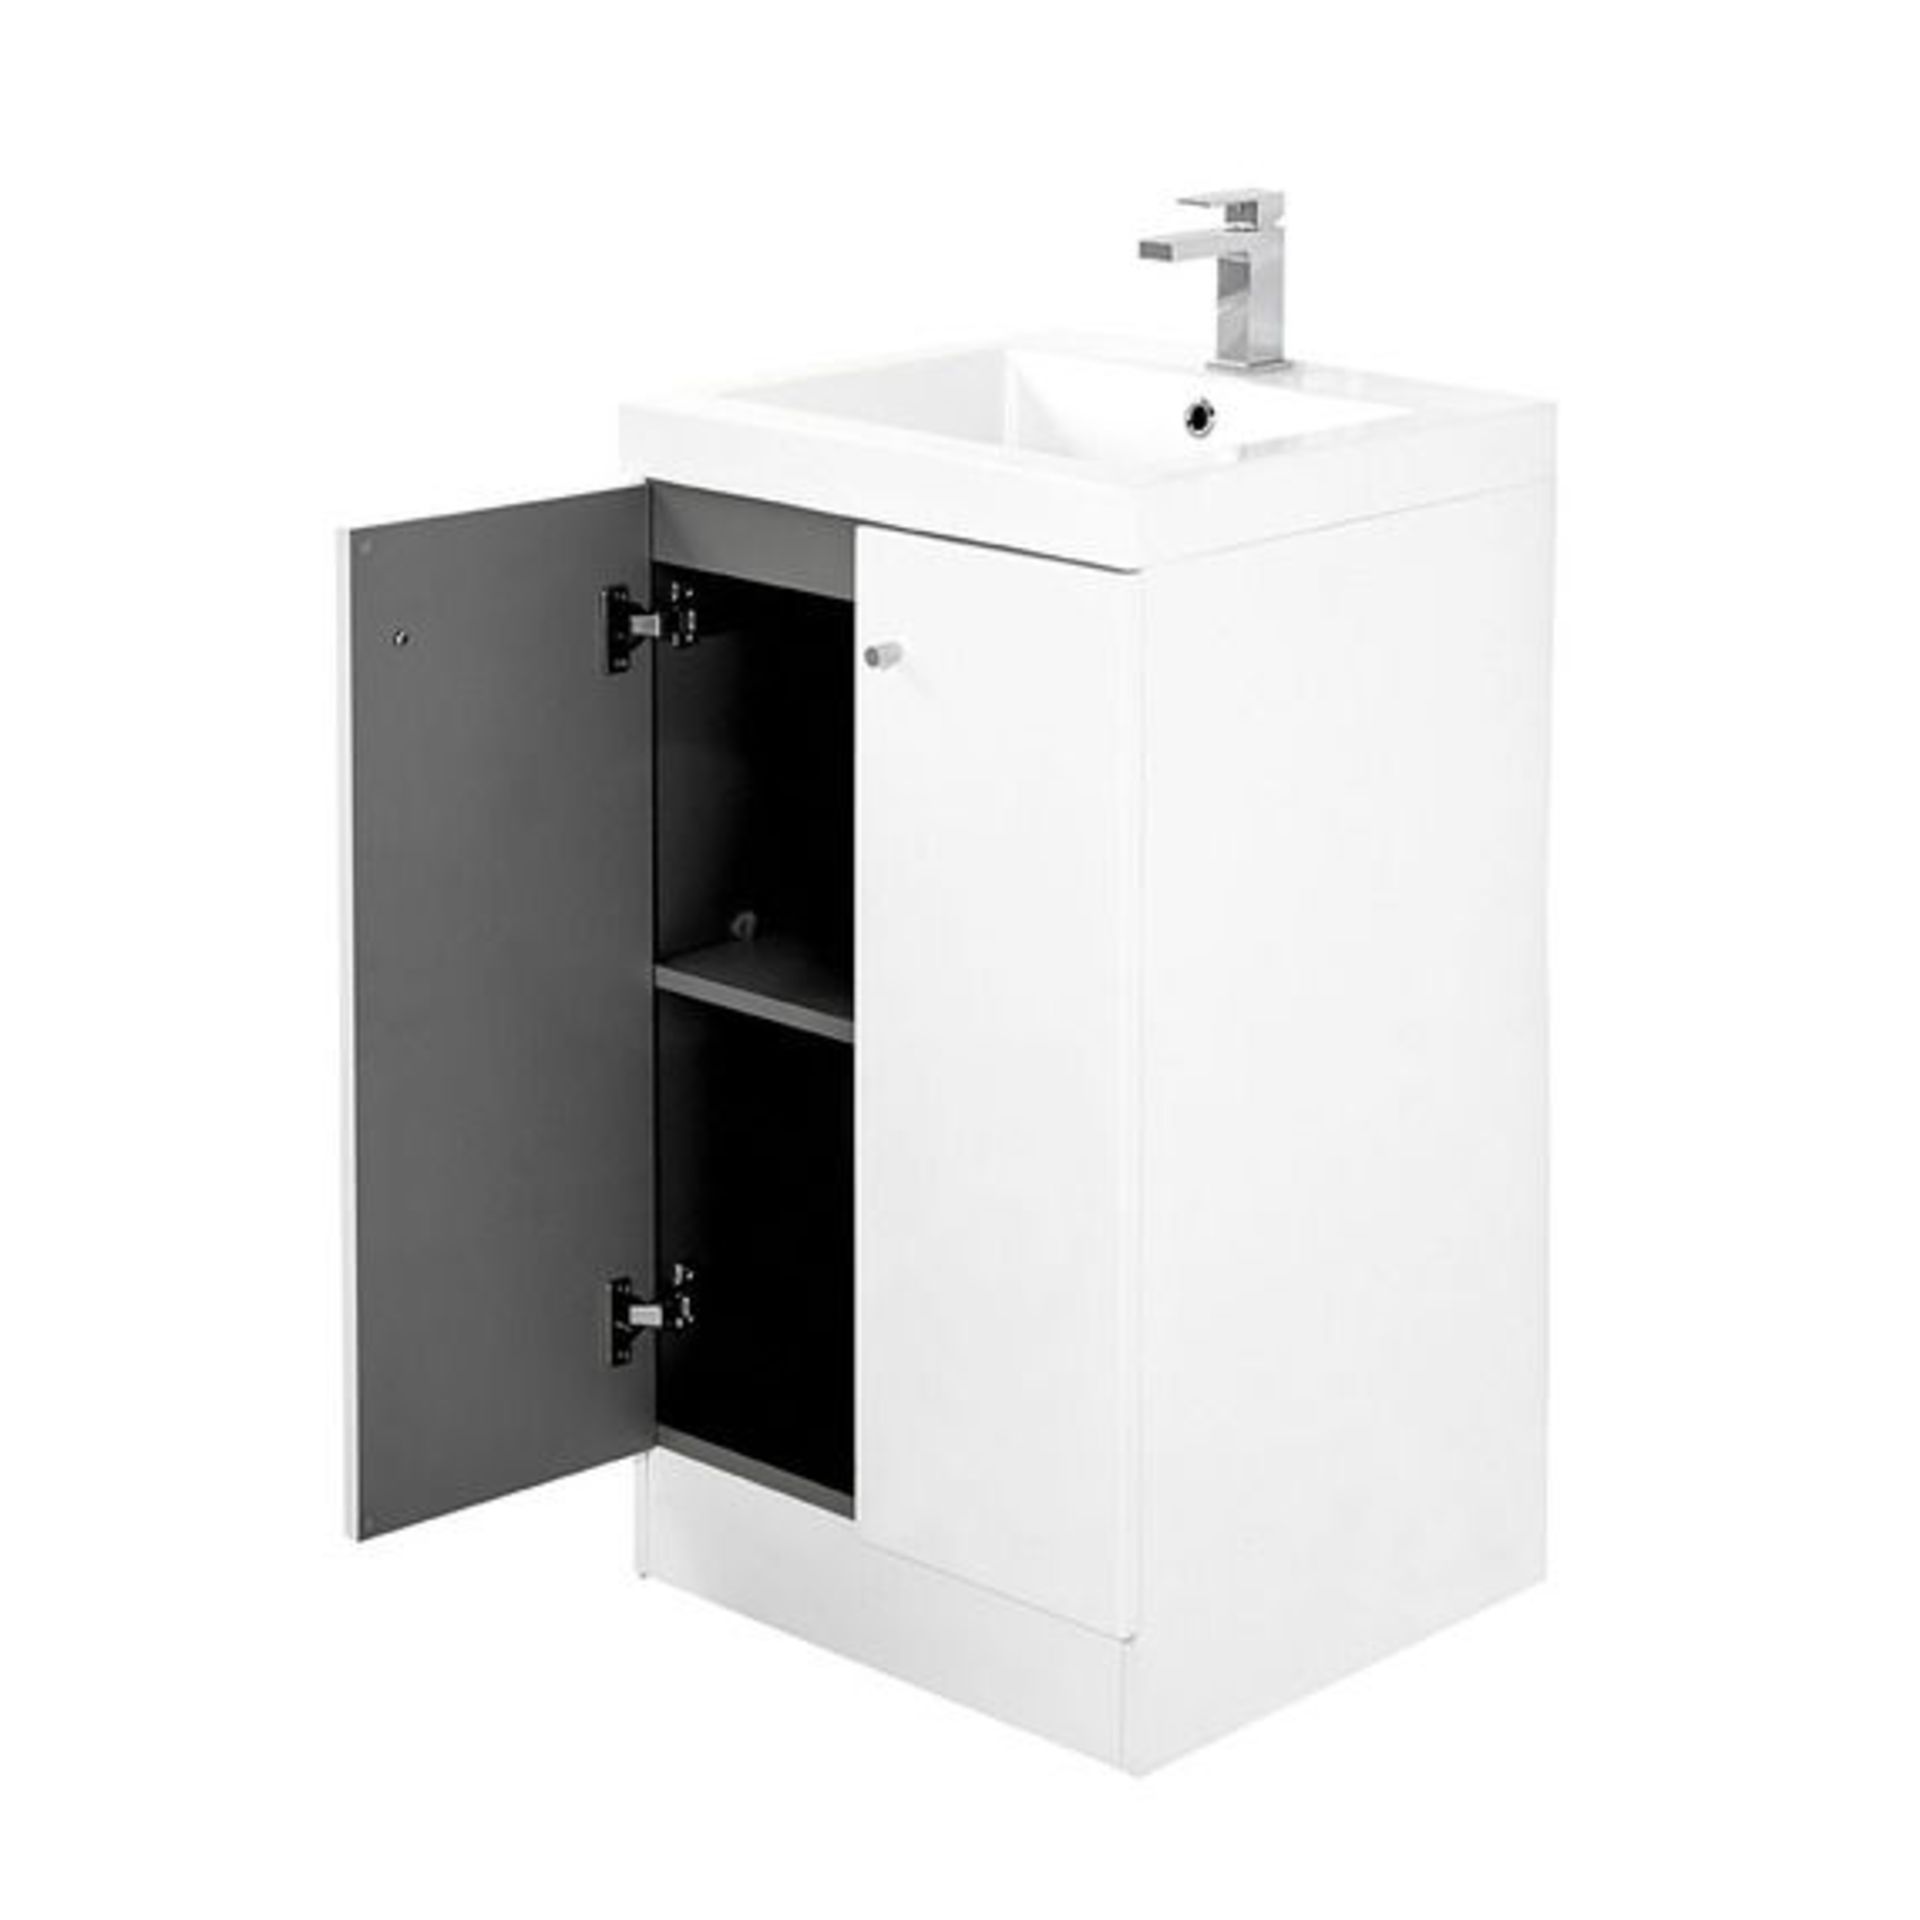 10 x Alpine Duo 500 Floor Standing Vanity Unit - Gloss White - Brand New Boxed Stock - Dimensions: - Image 3 of 4